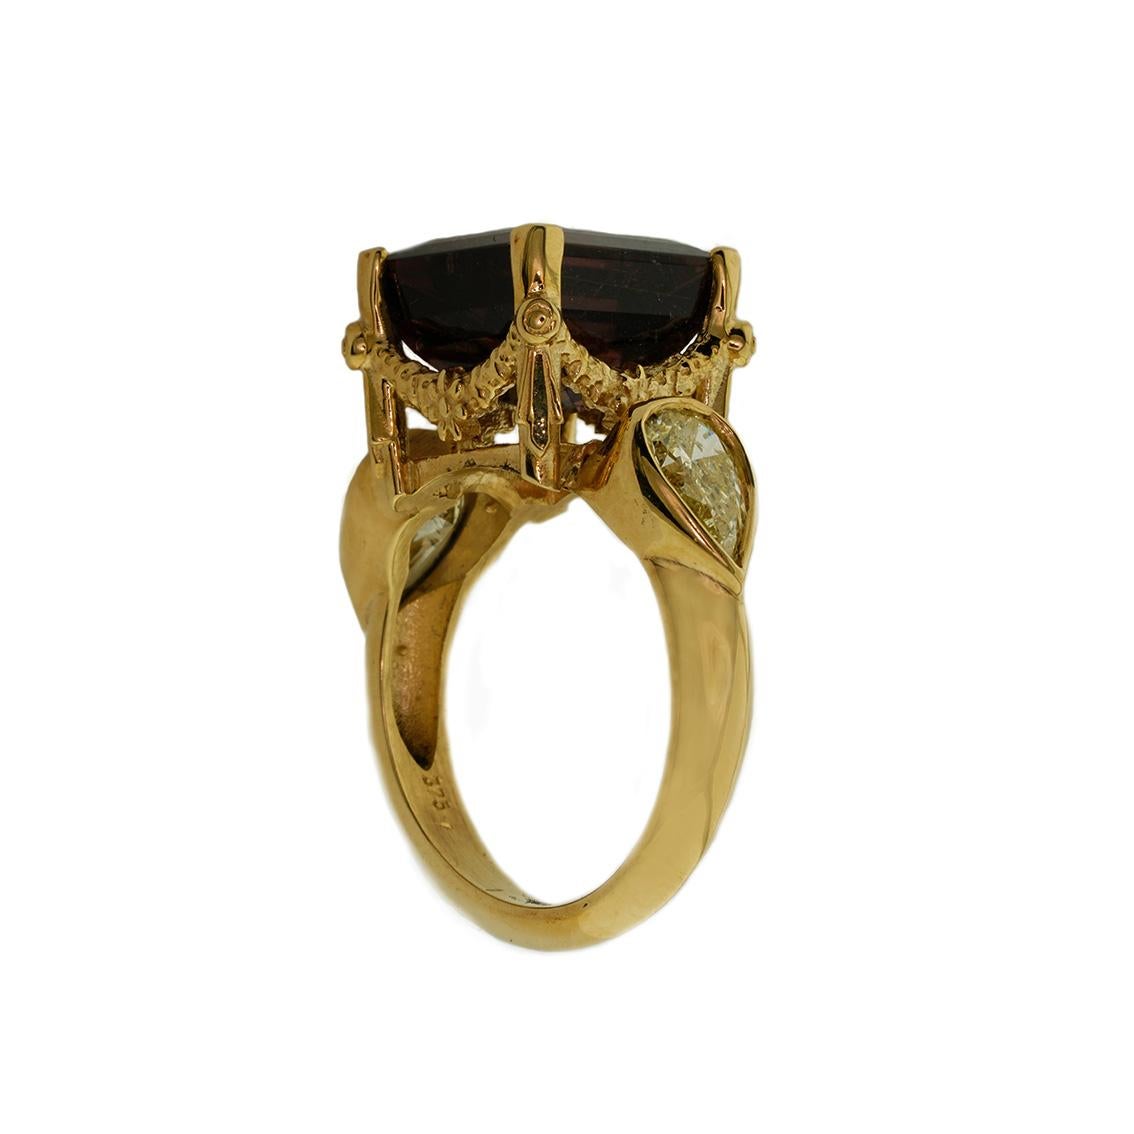 William Llewellyn Griffiths Diamonds and Tourmaline Romantic Rites Ring (Romantik)